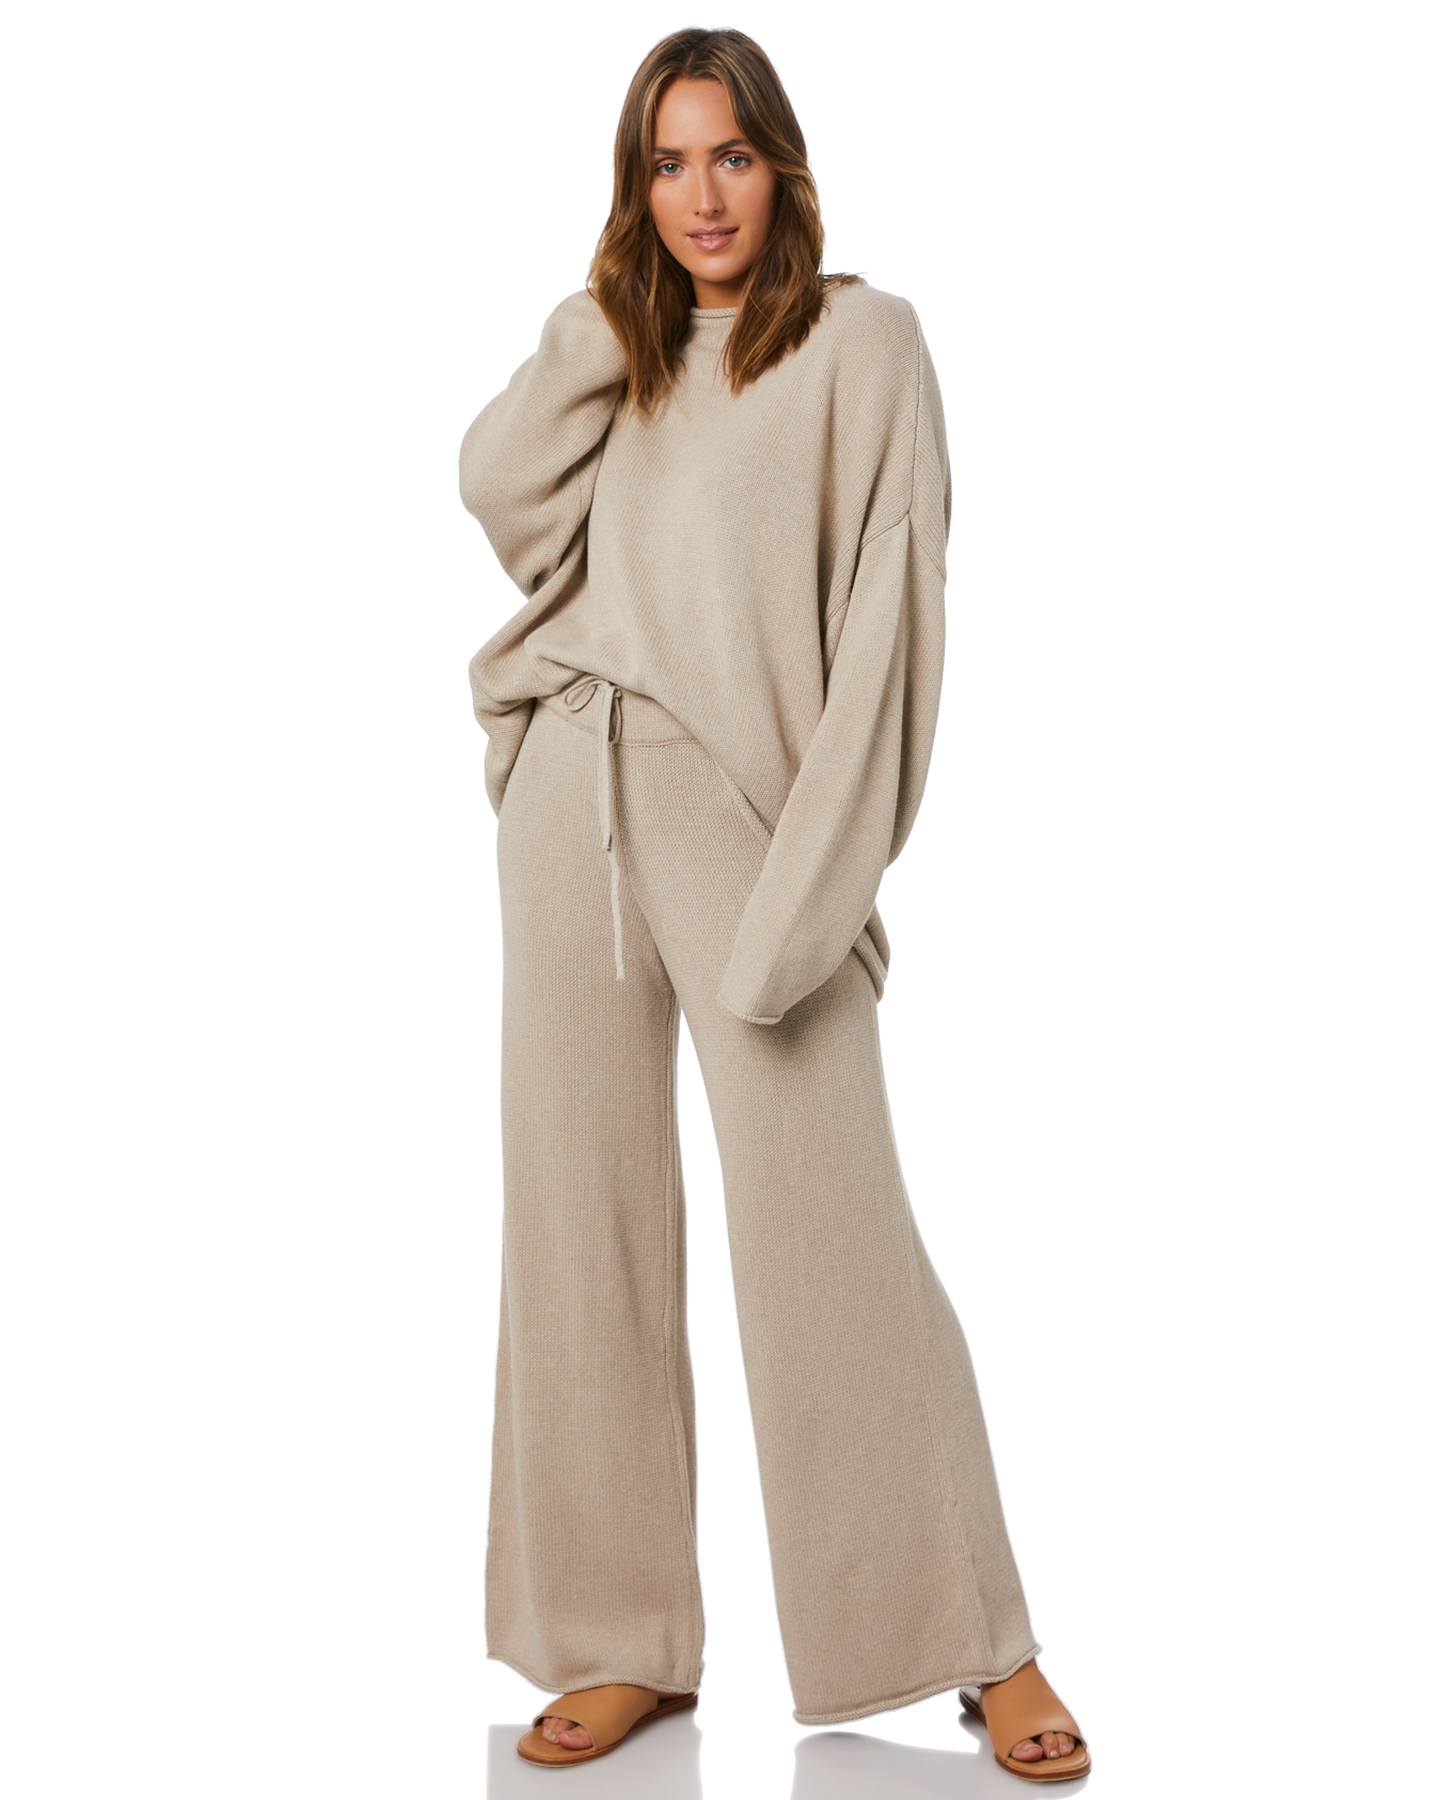 Zulu And Zephyr Relax Knit Pant - Husk | SurfStitch